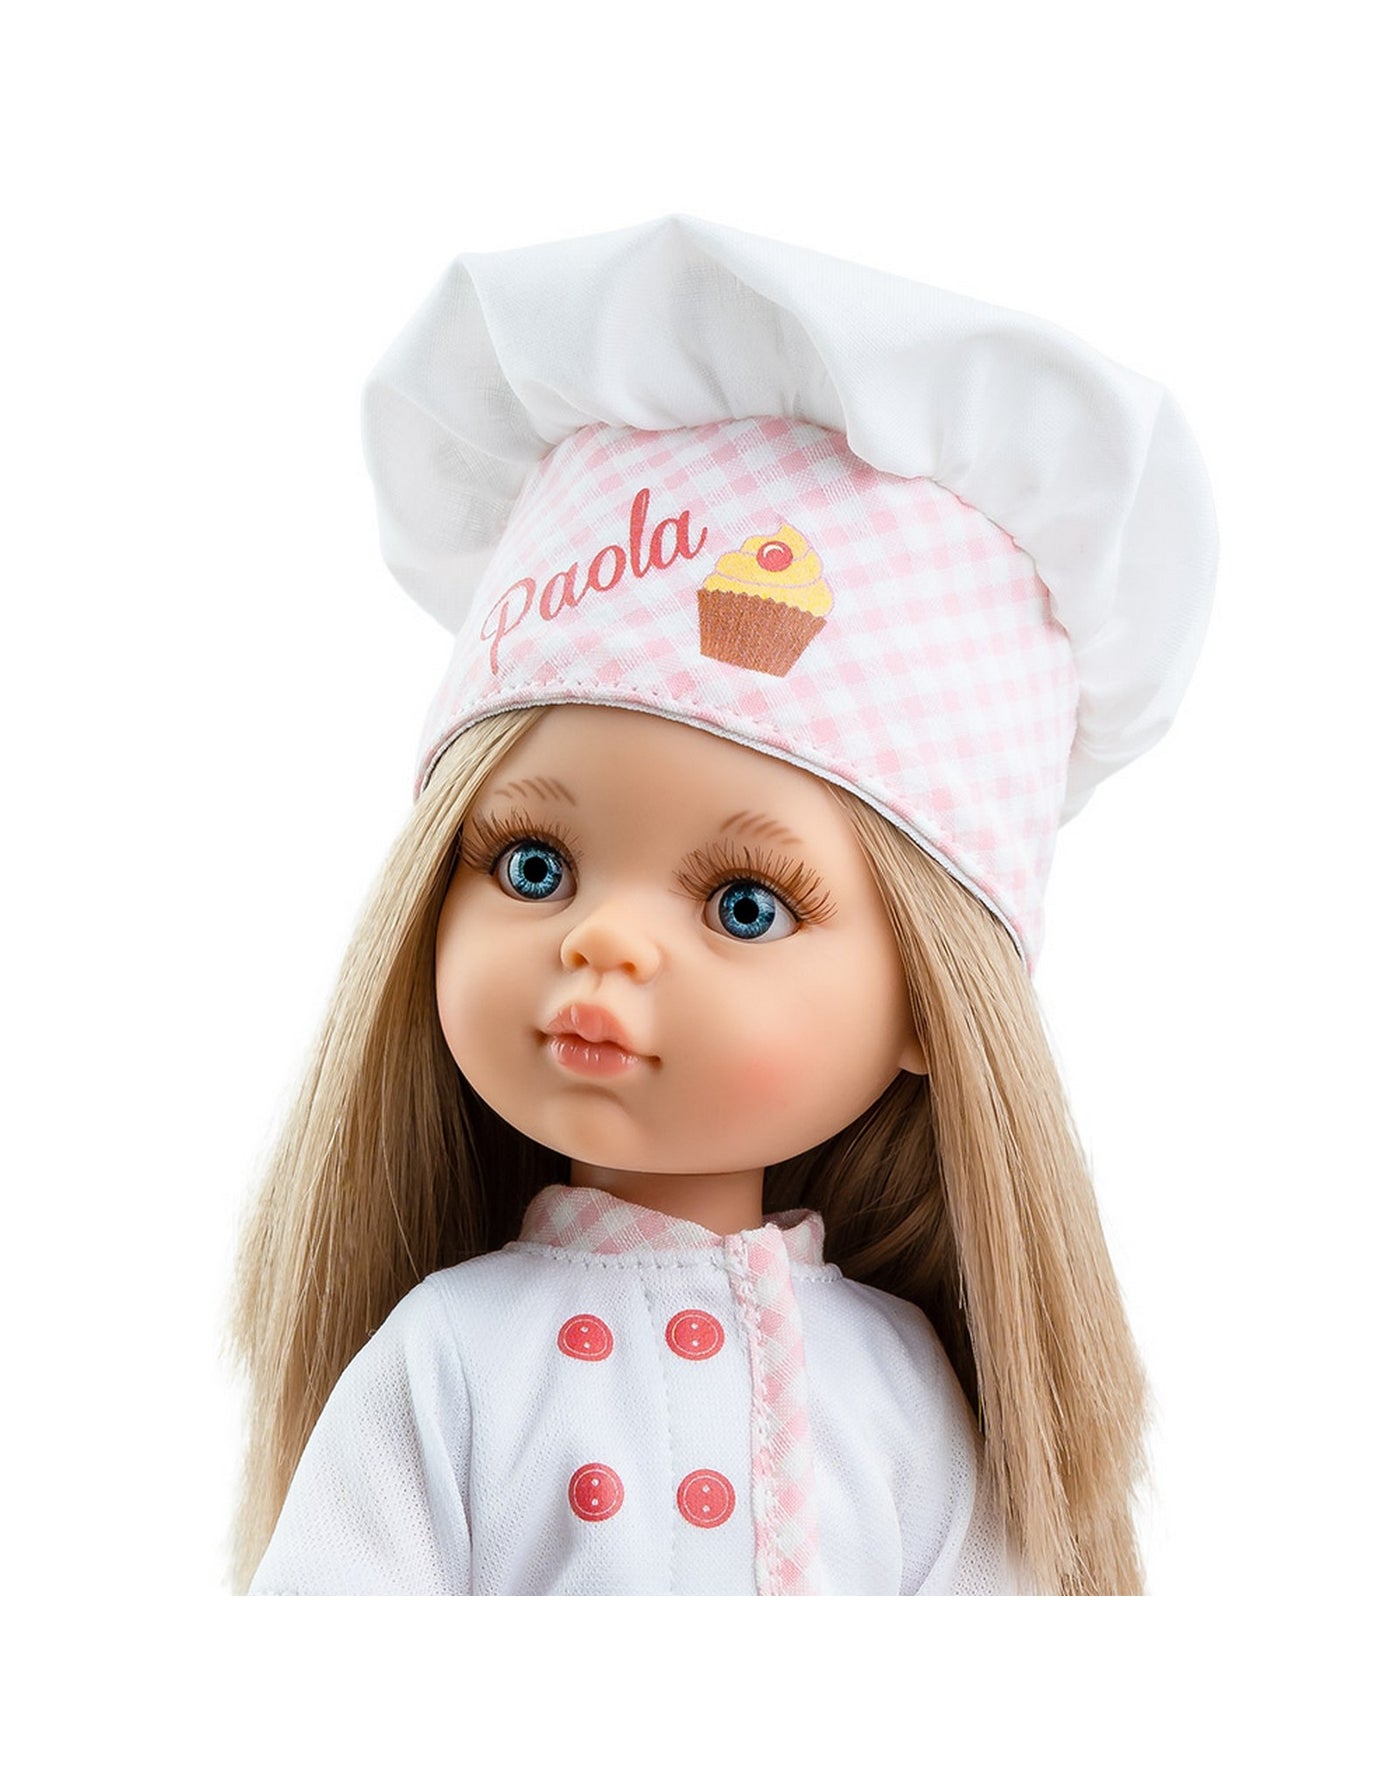 Las Amigas Doll - Carla with pastry chef set - Paola Reina